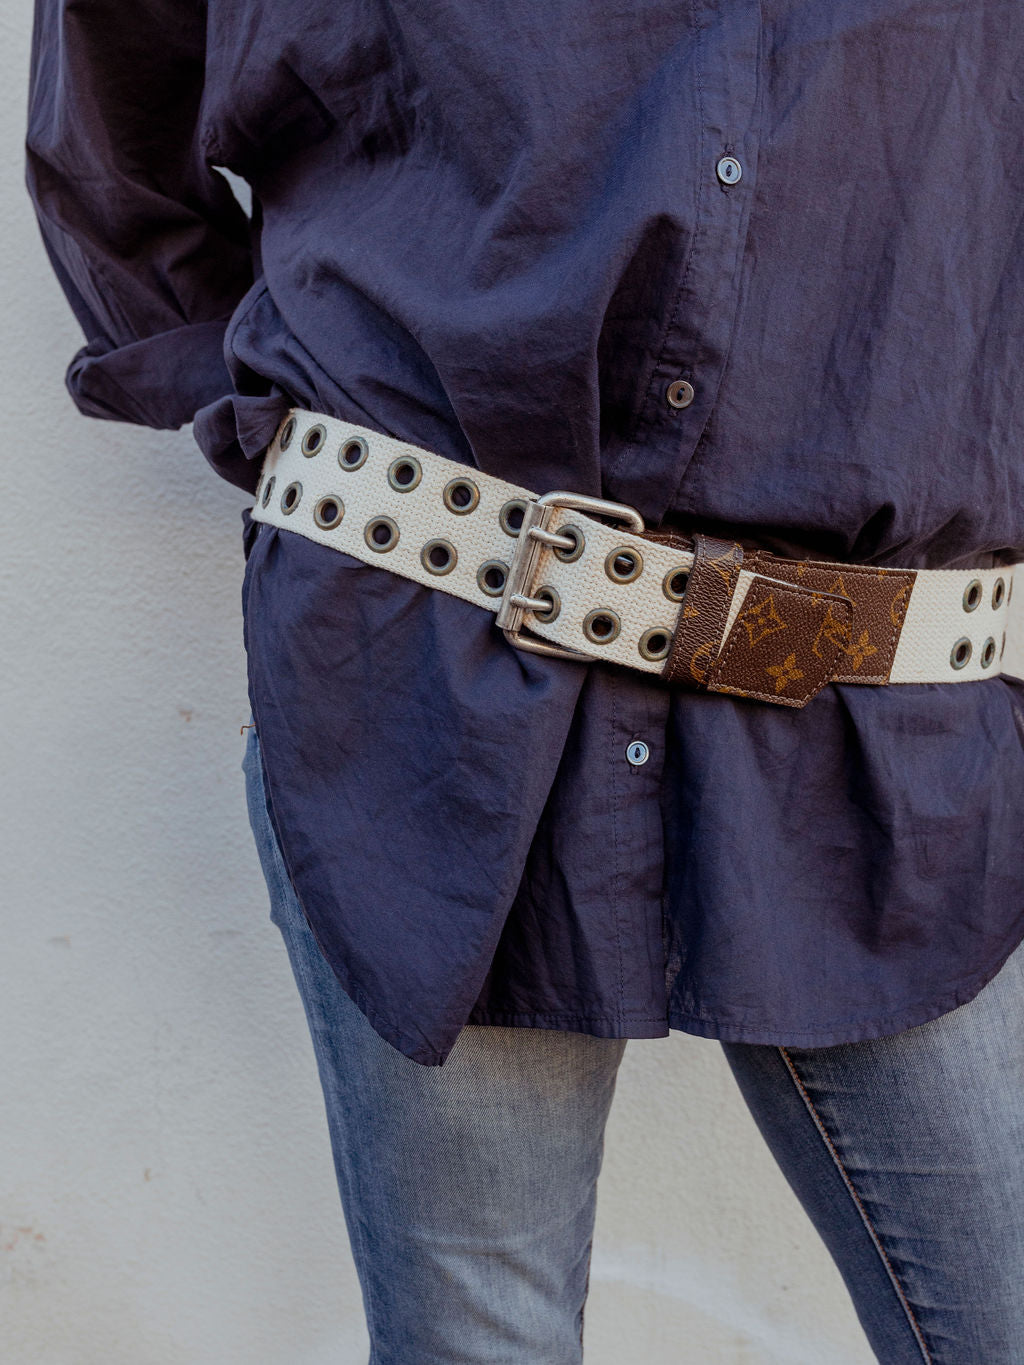 Repurposed Canvas Belt by Salty Bitch